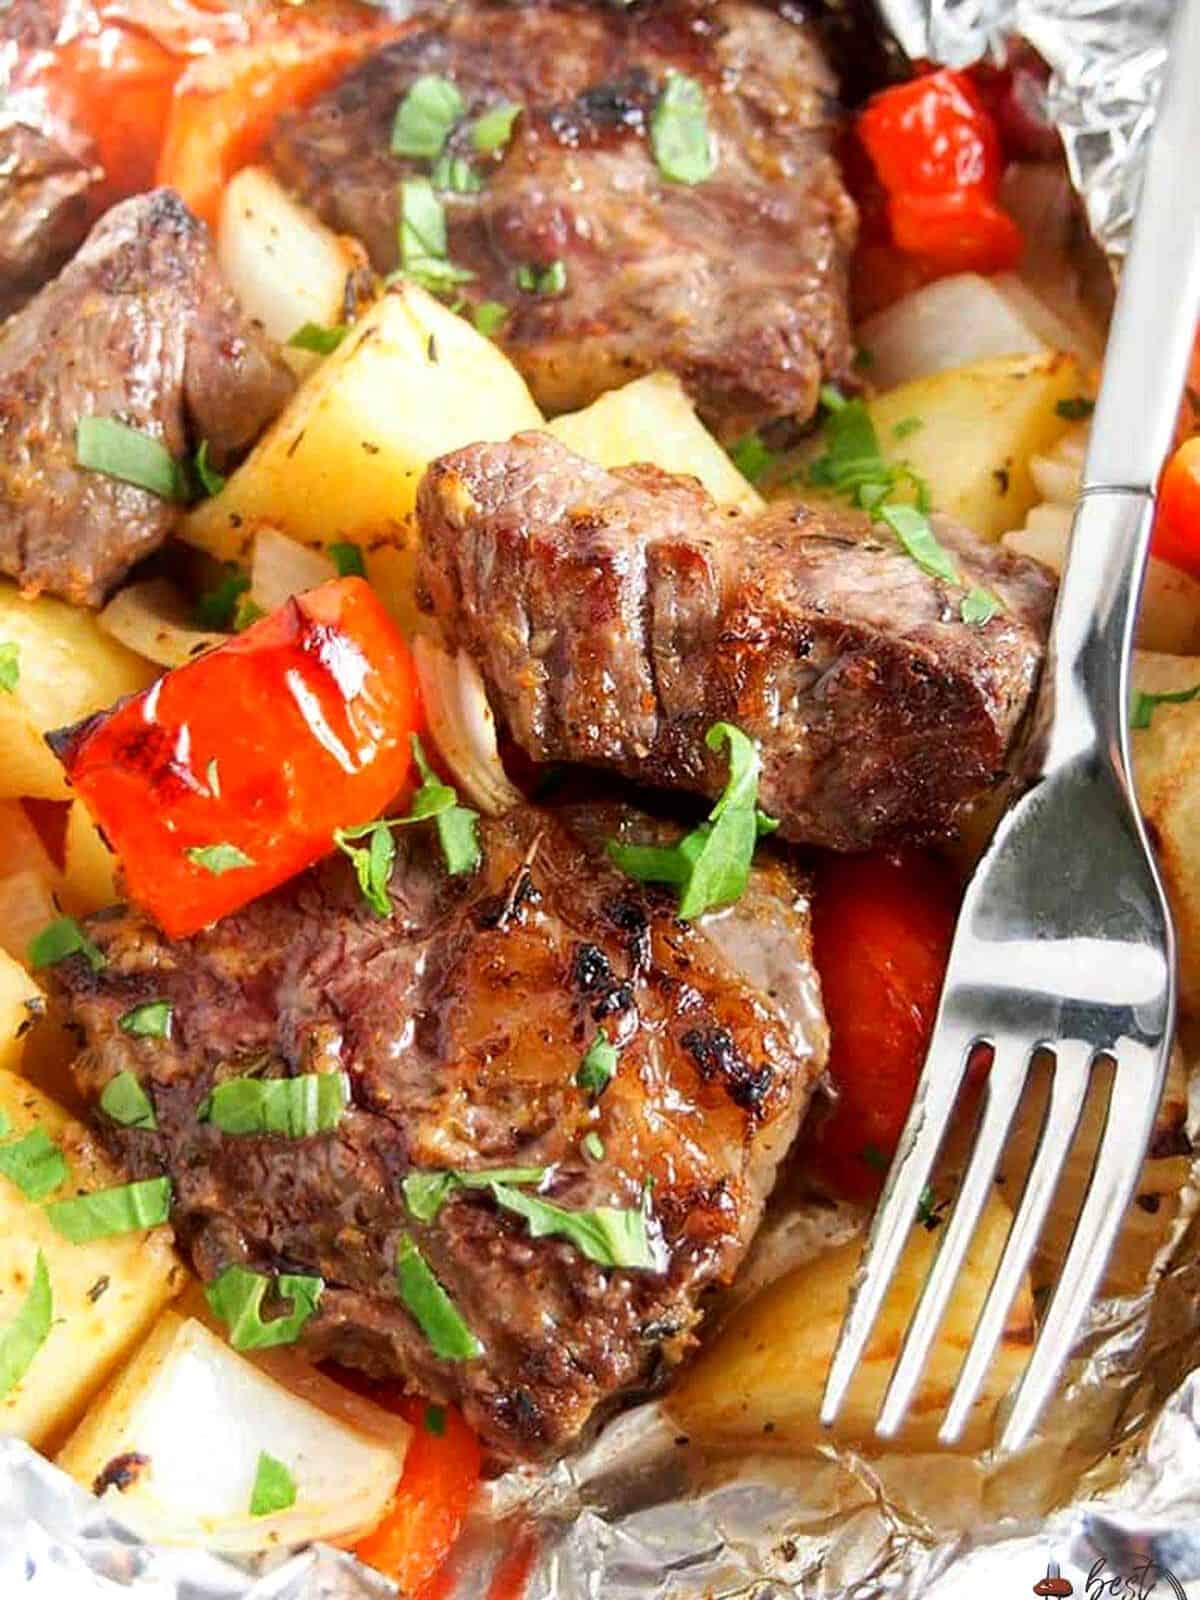 Steak with potatoes and pepper in foil.